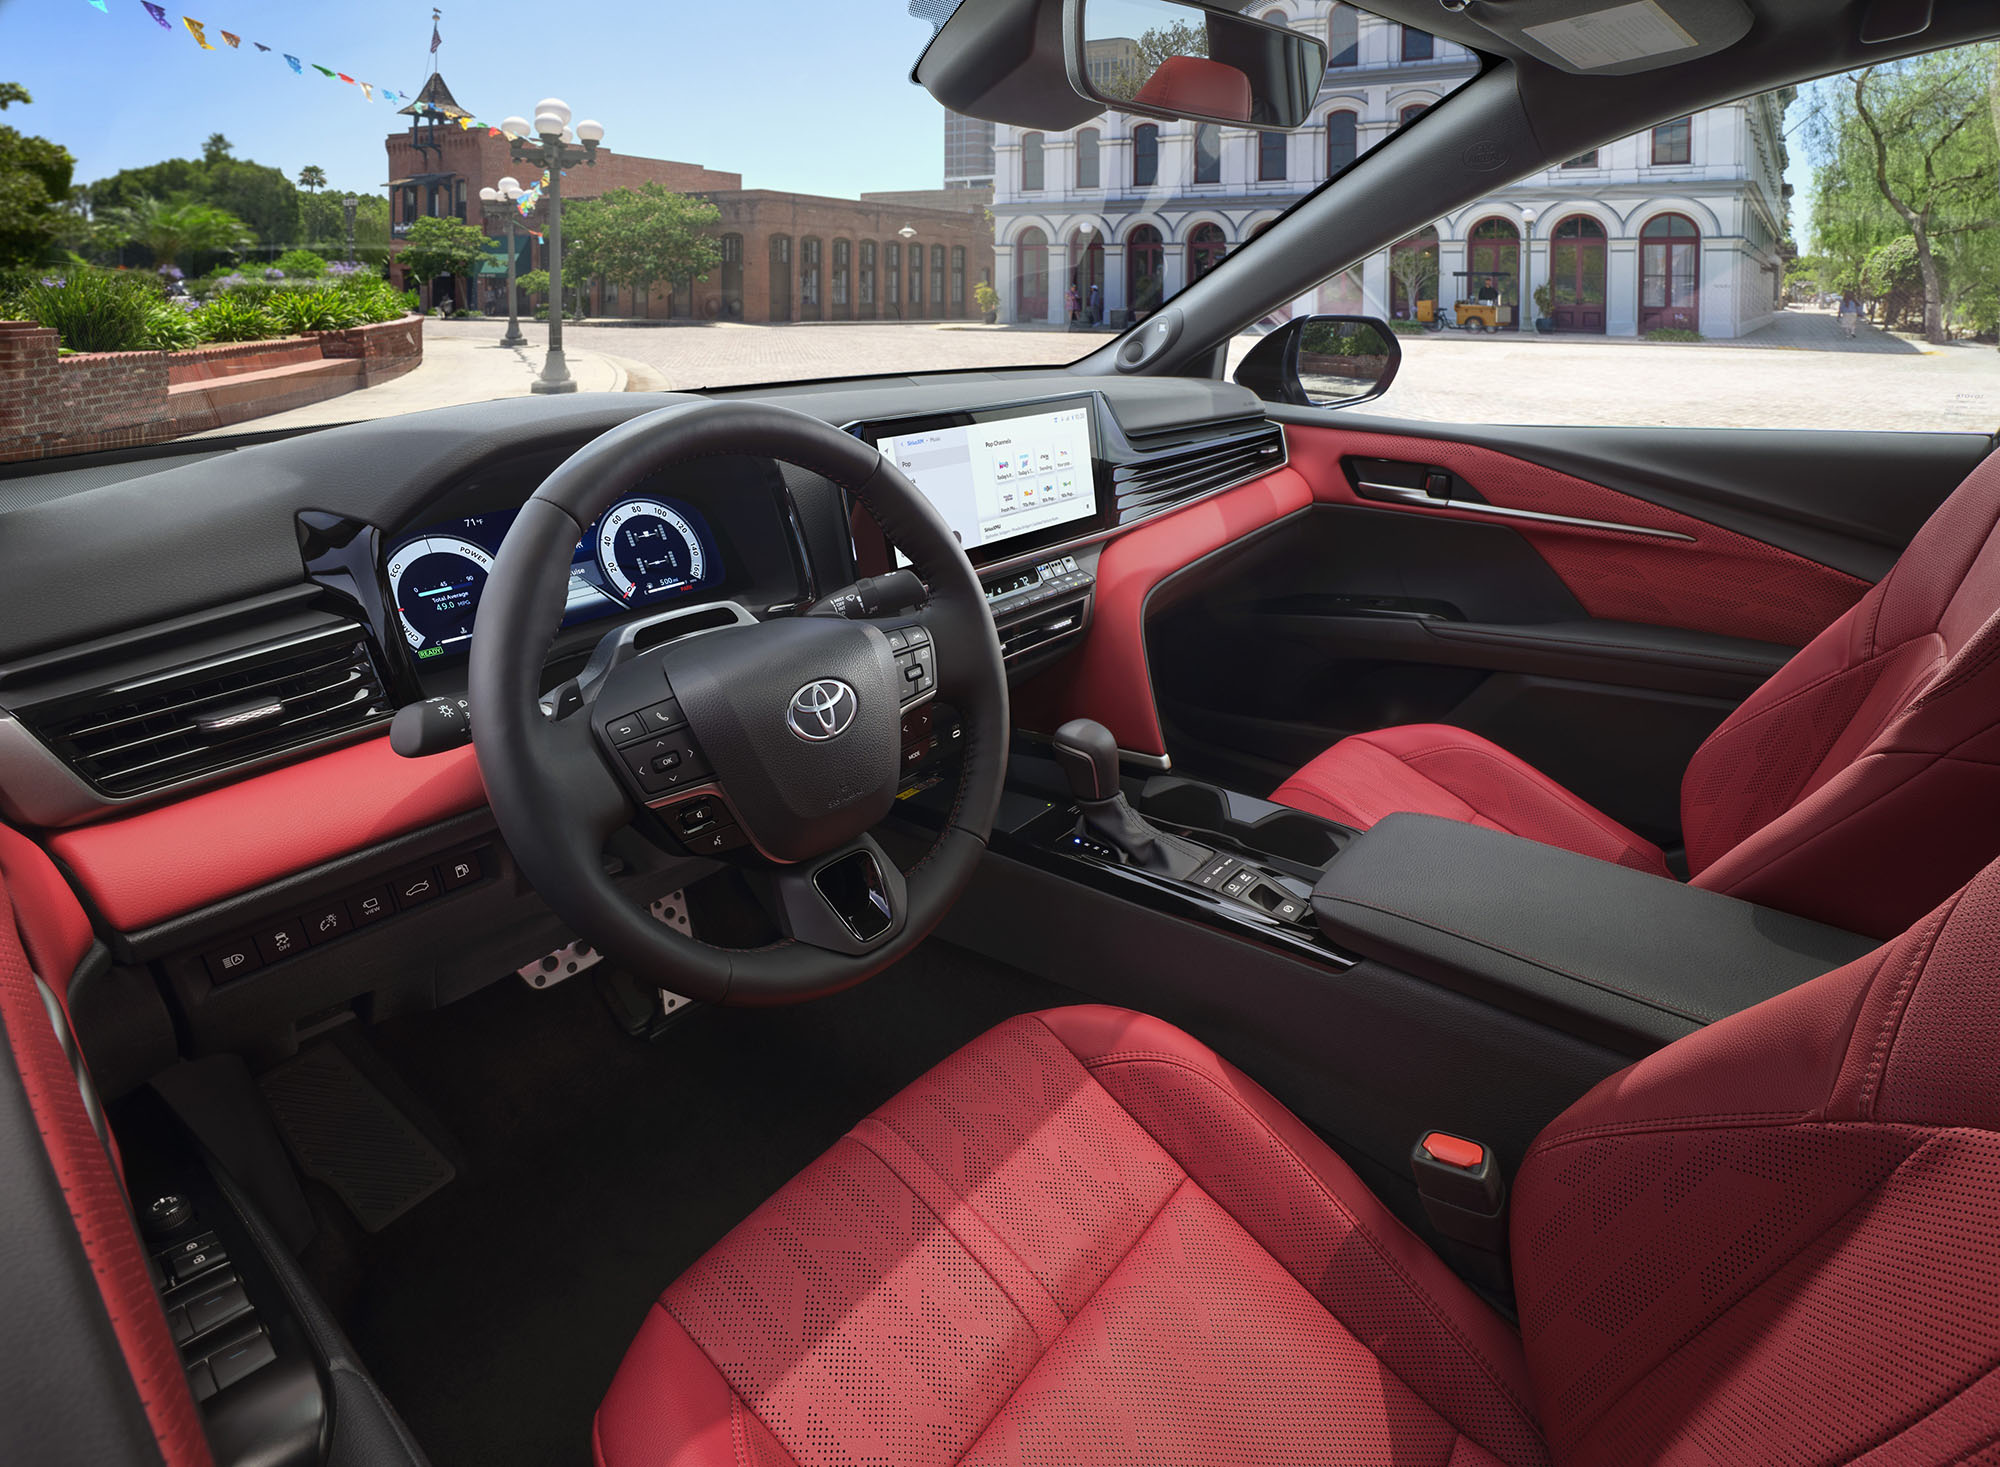 2025 Toyota Camry interior in red